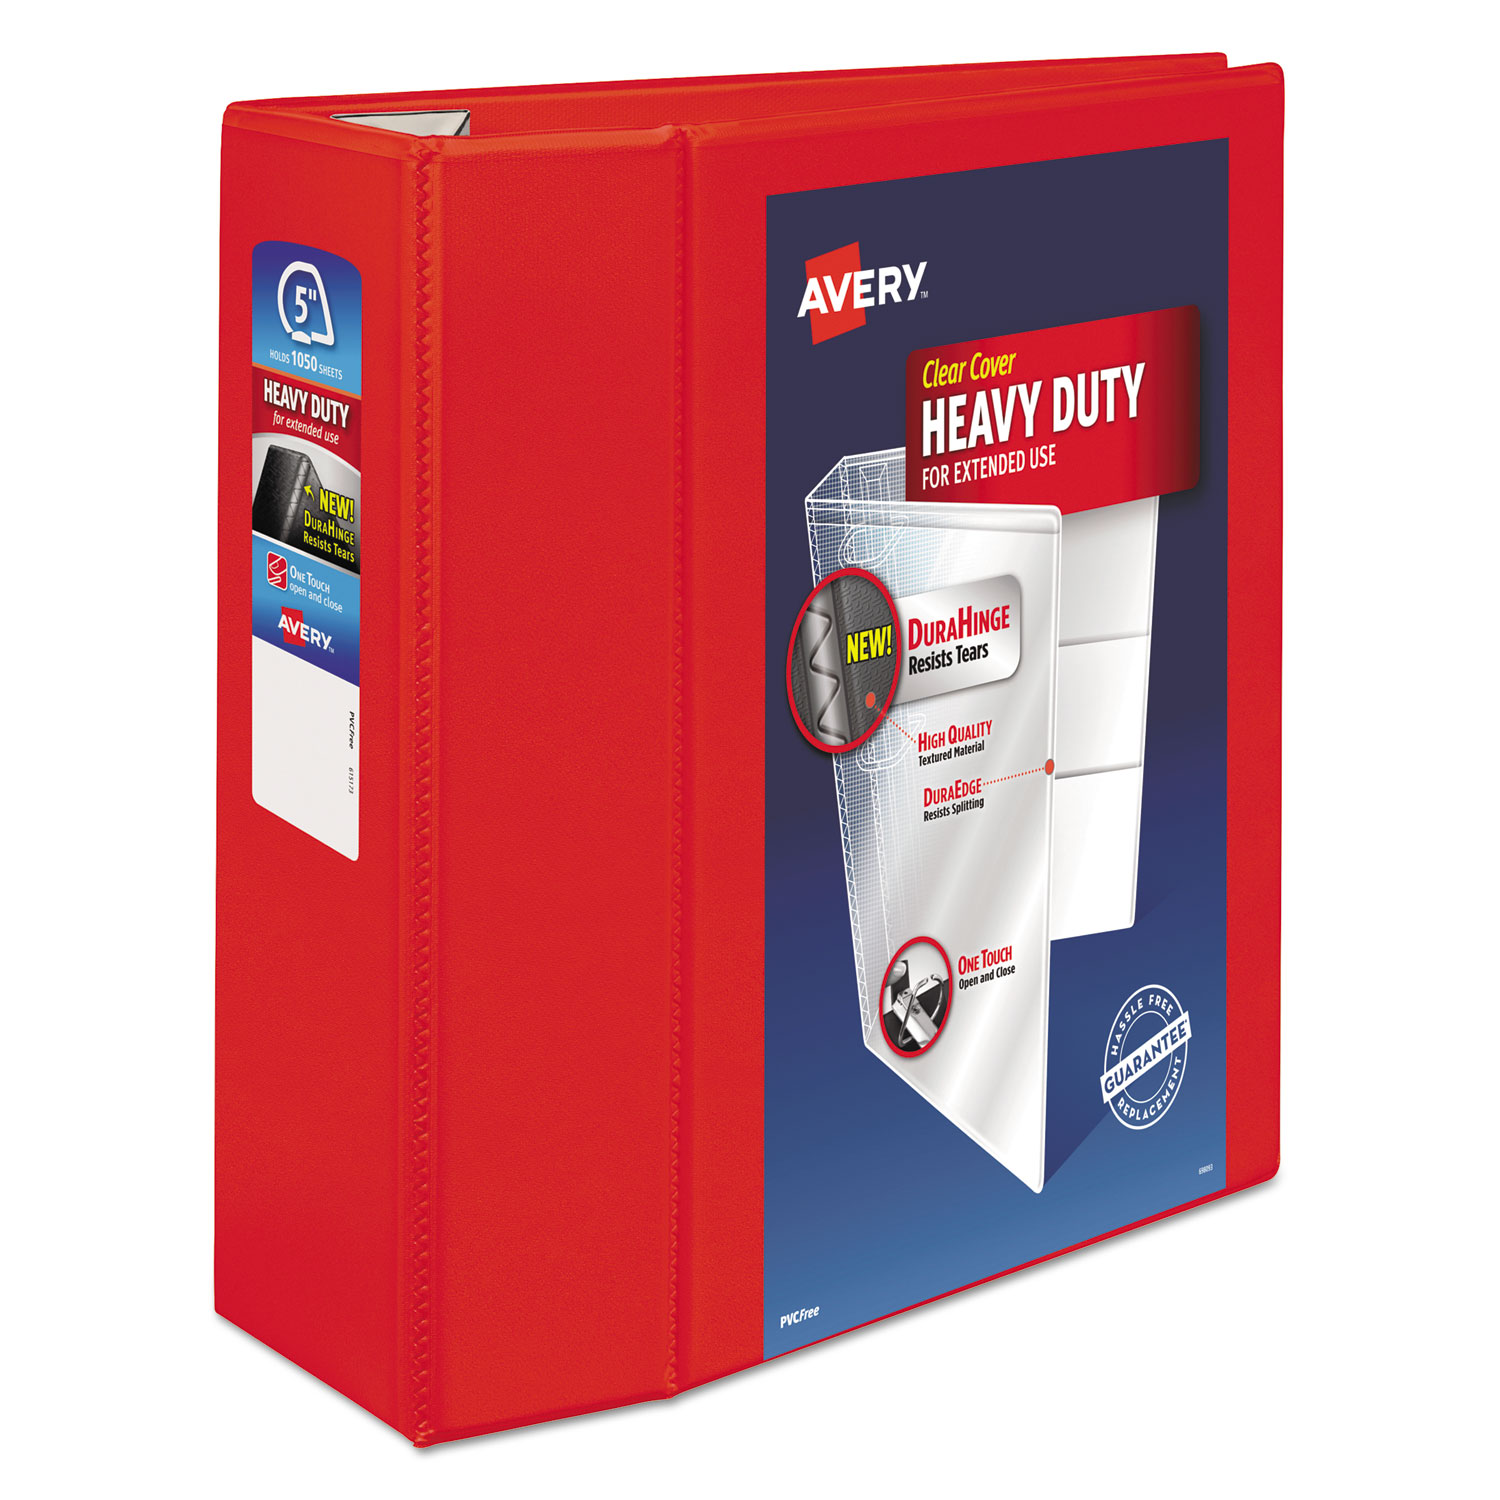  Avery 79327 Heavy-Duty View Binder with DuraHinge and Locking One Touch EZD Rings, 3 Rings, 5 Capacity, 11 x 8.5, Red (AVE79327) 